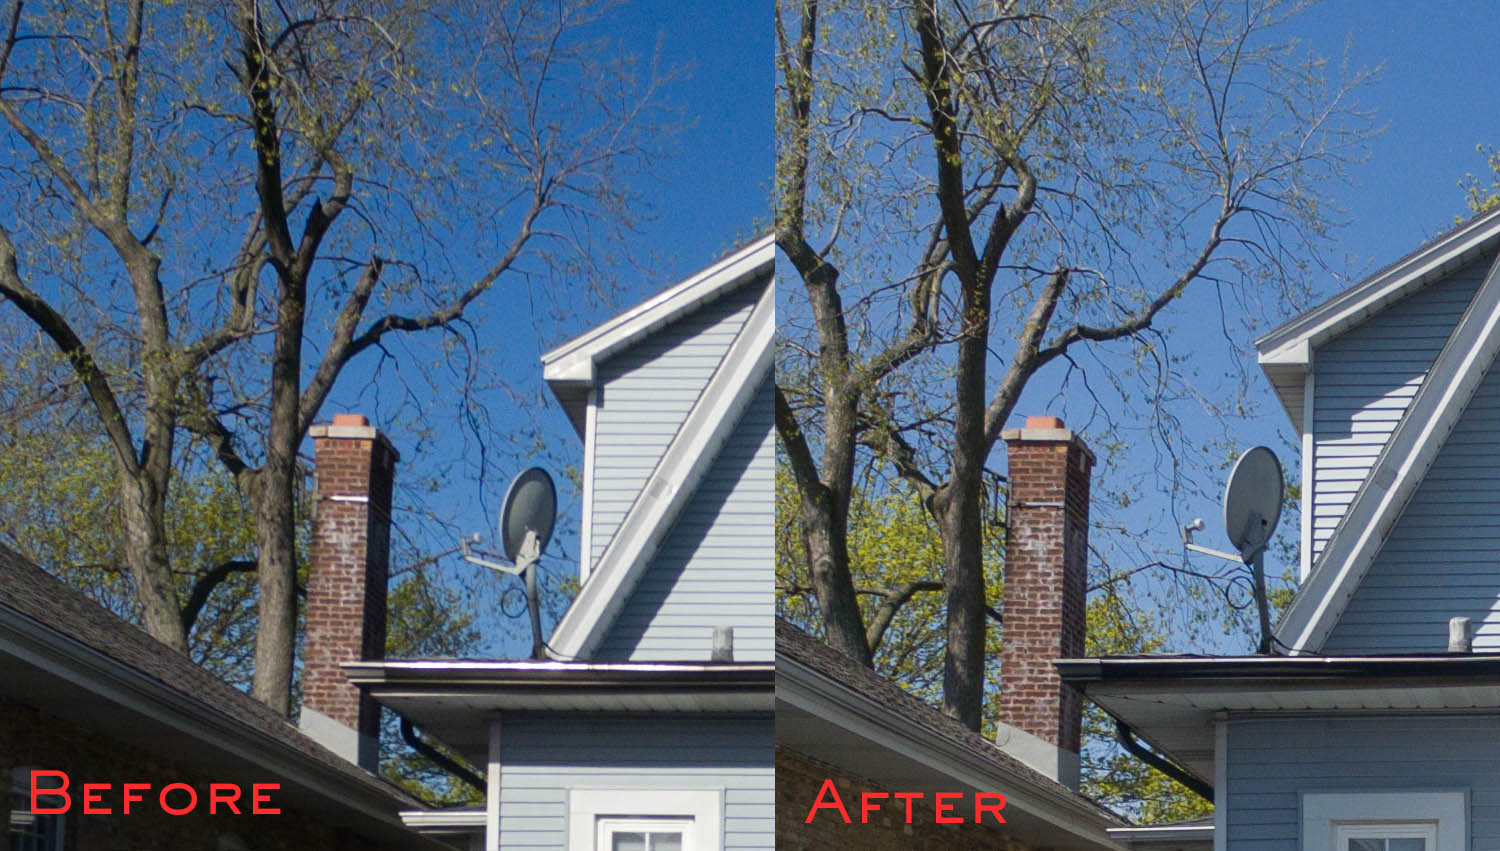 3-Tree-chimney-Before-After.jpg